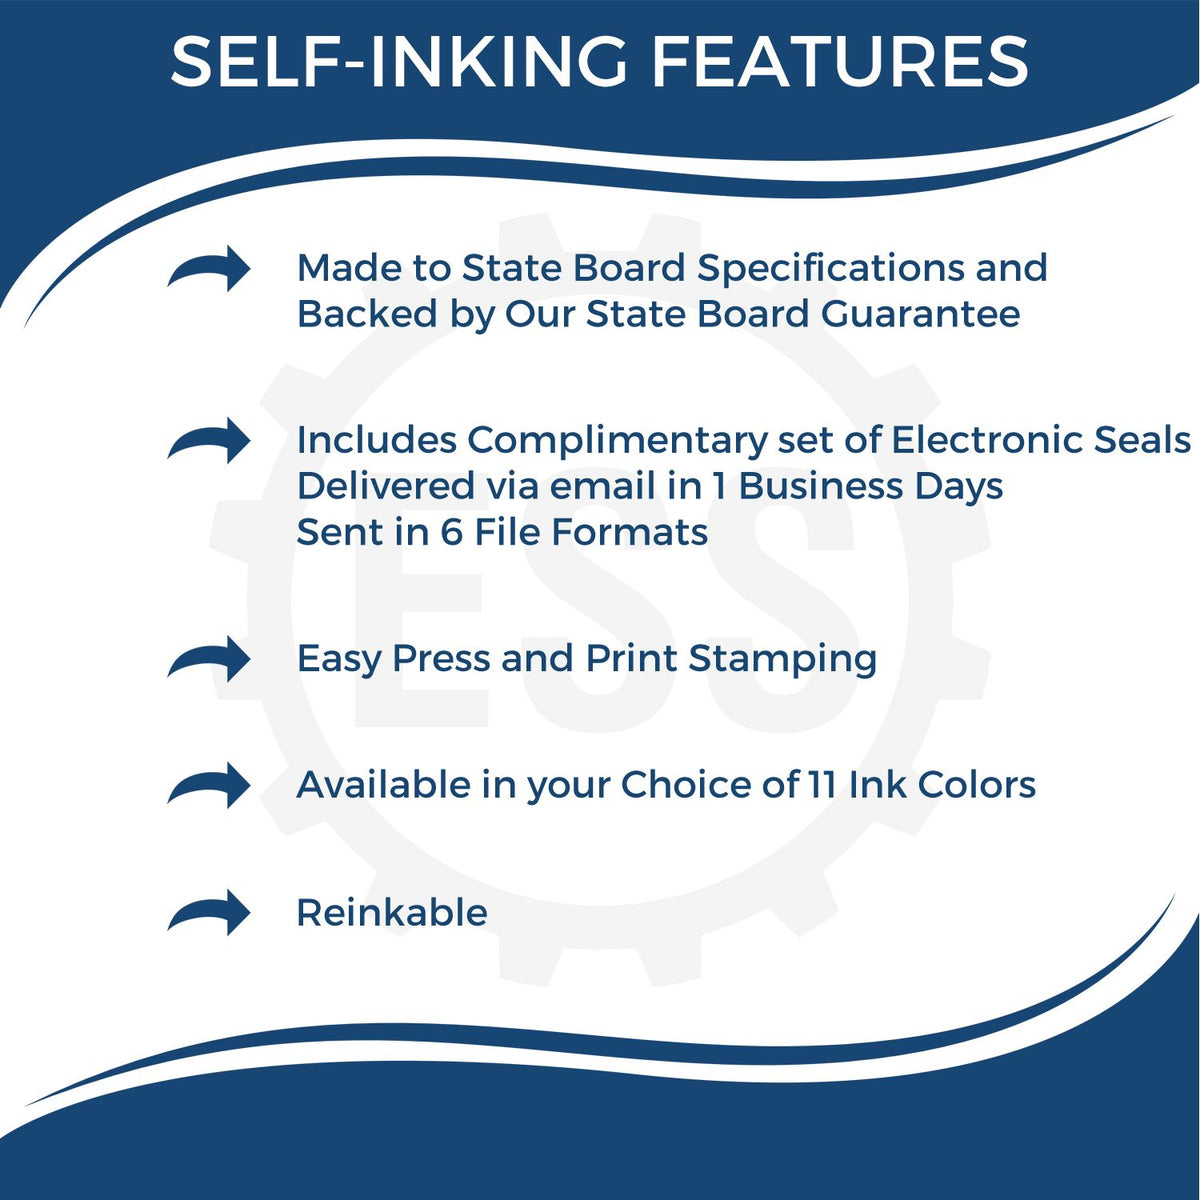 A picture of an infographic highlighting the selling points for the Self-Inking Rectangular Florida Notary Stamp